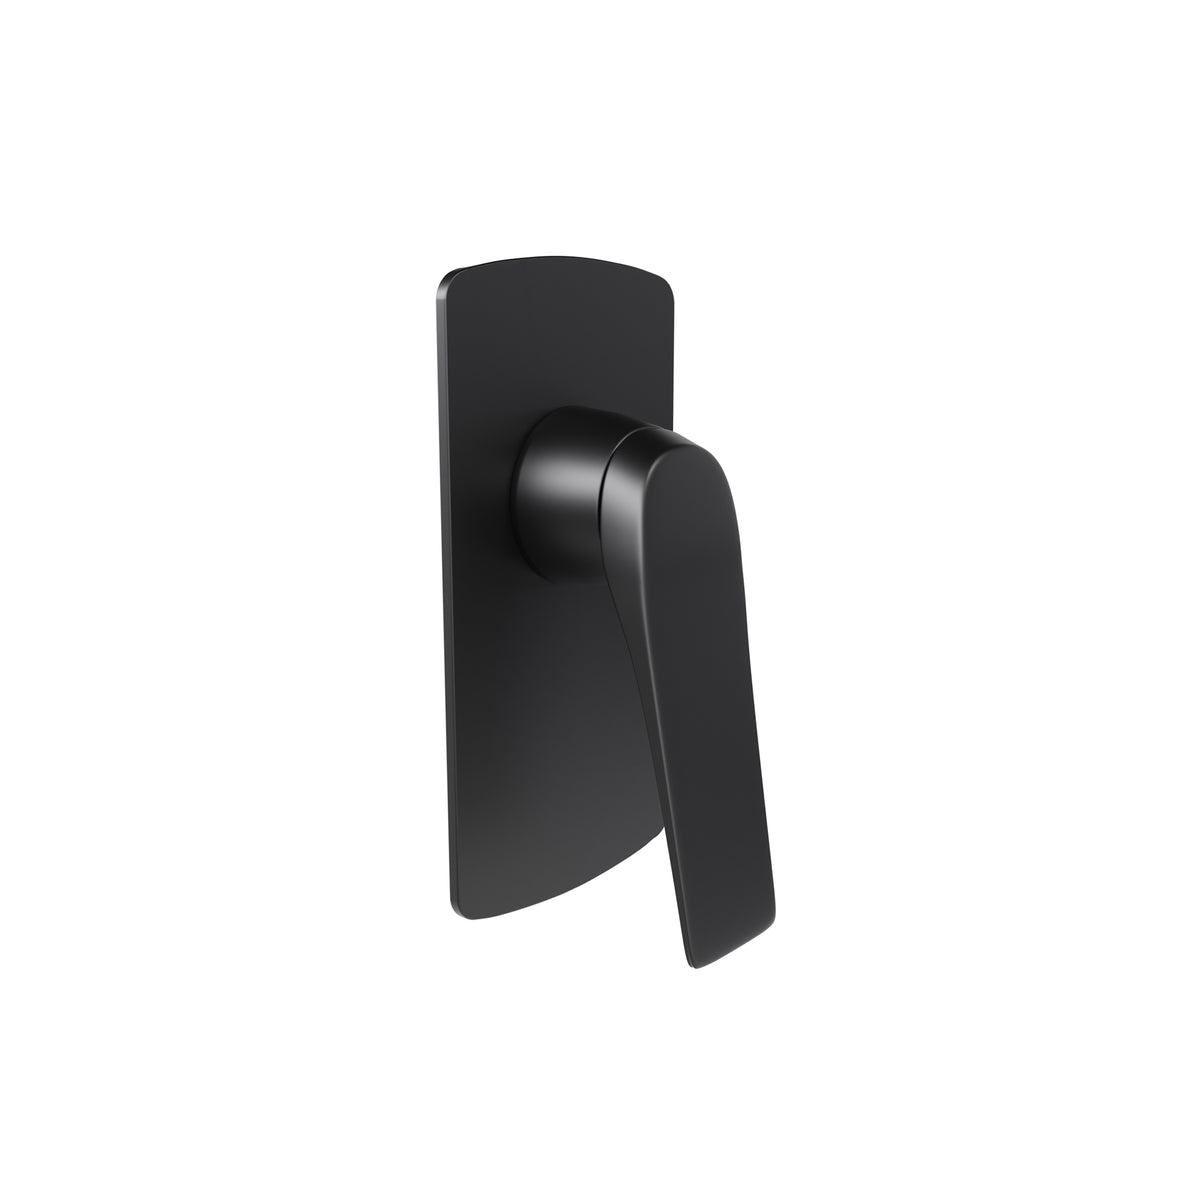 Trento Wall Mounted Shower Mixer in Black